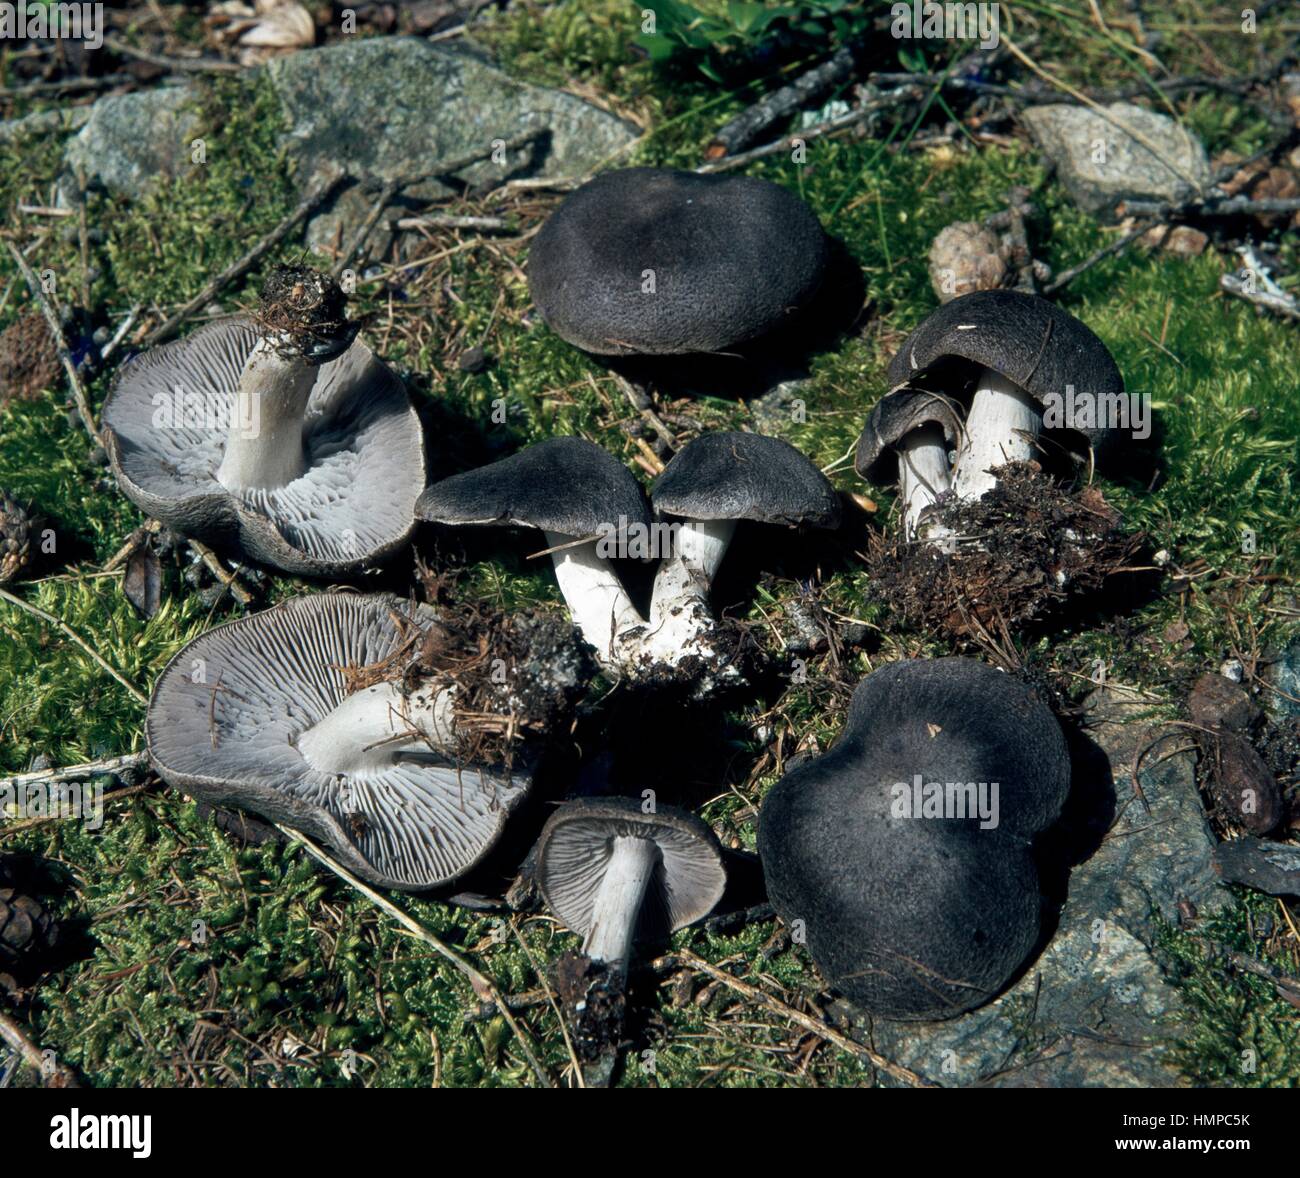 Examples of Grey Knight (Tricholoma terreum), Tricholomatacee. Stock Photo